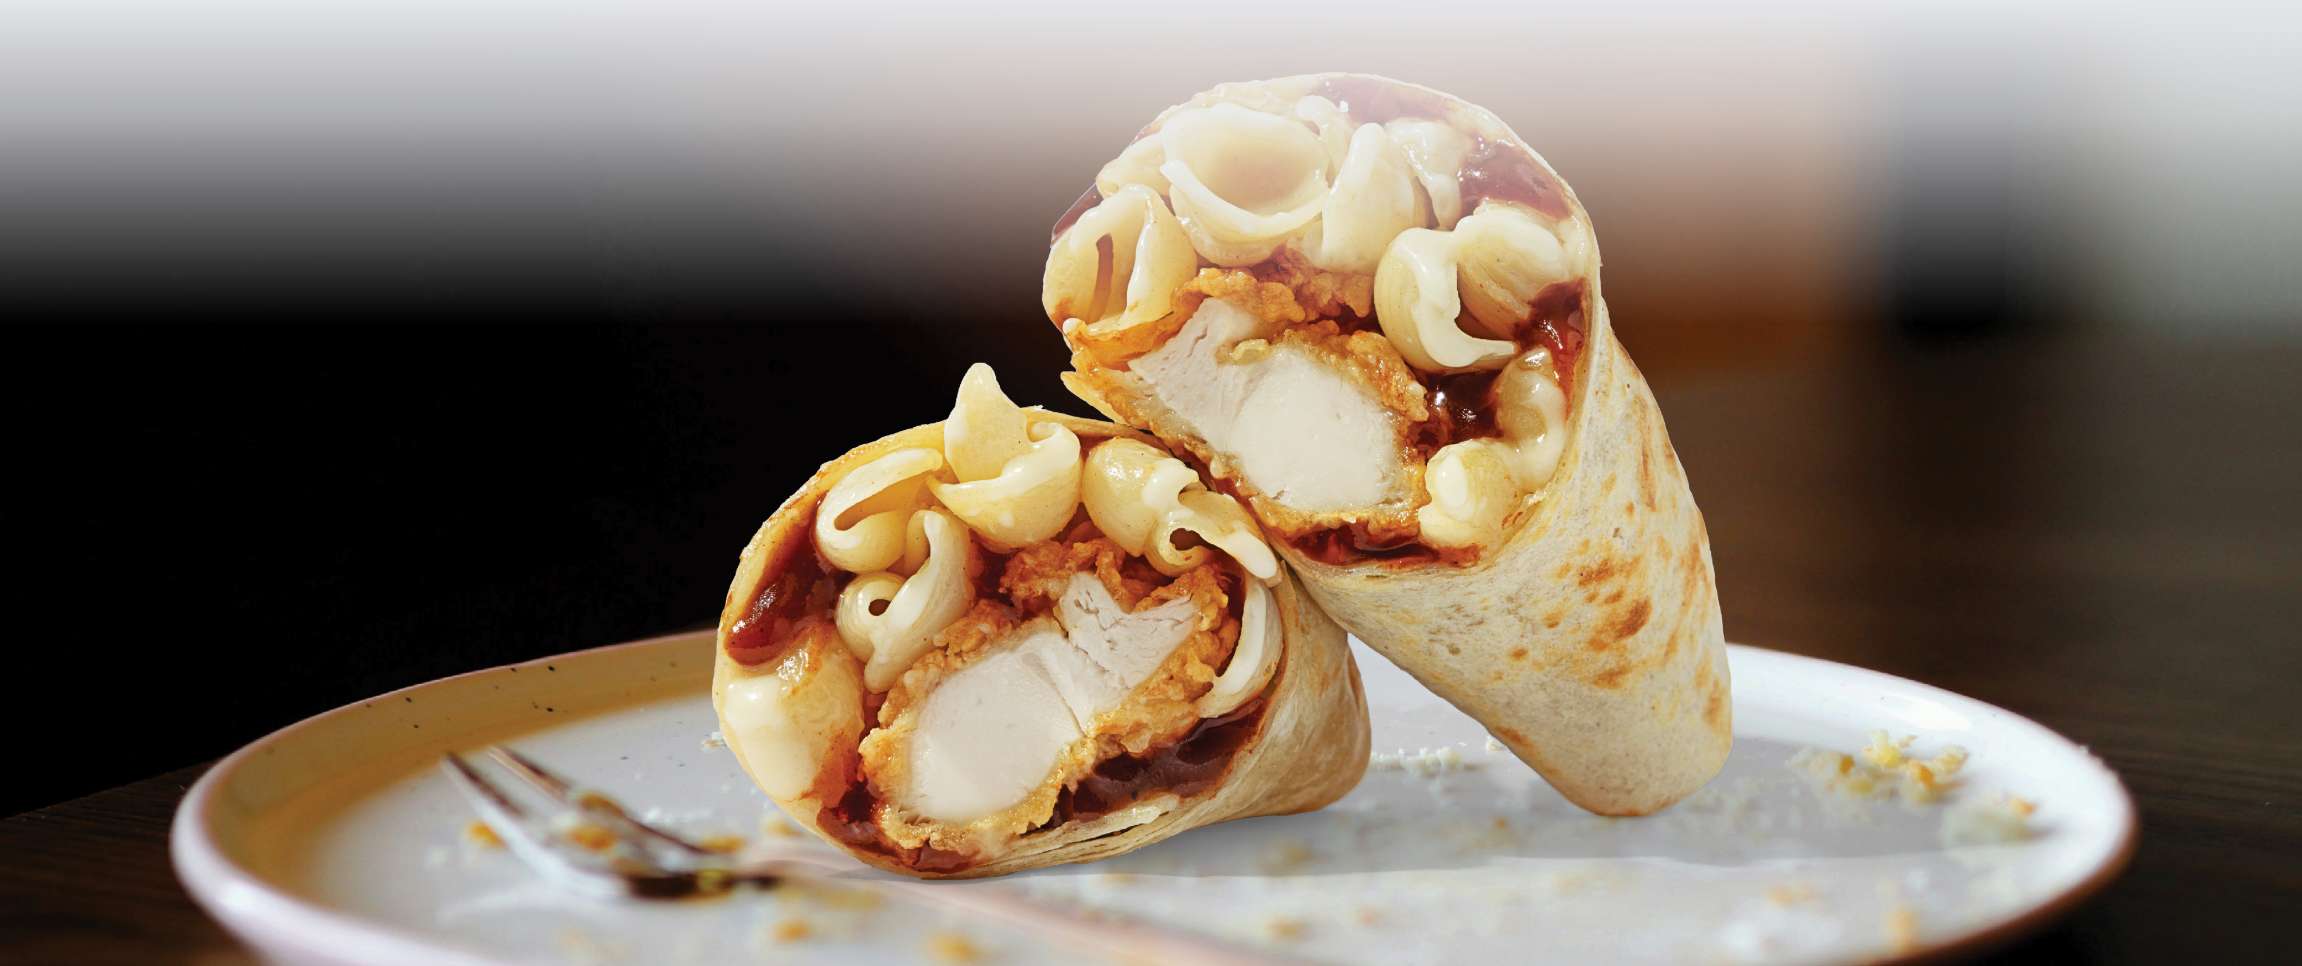 BBQ Fried Chicken and Mac & Cheese Wrap